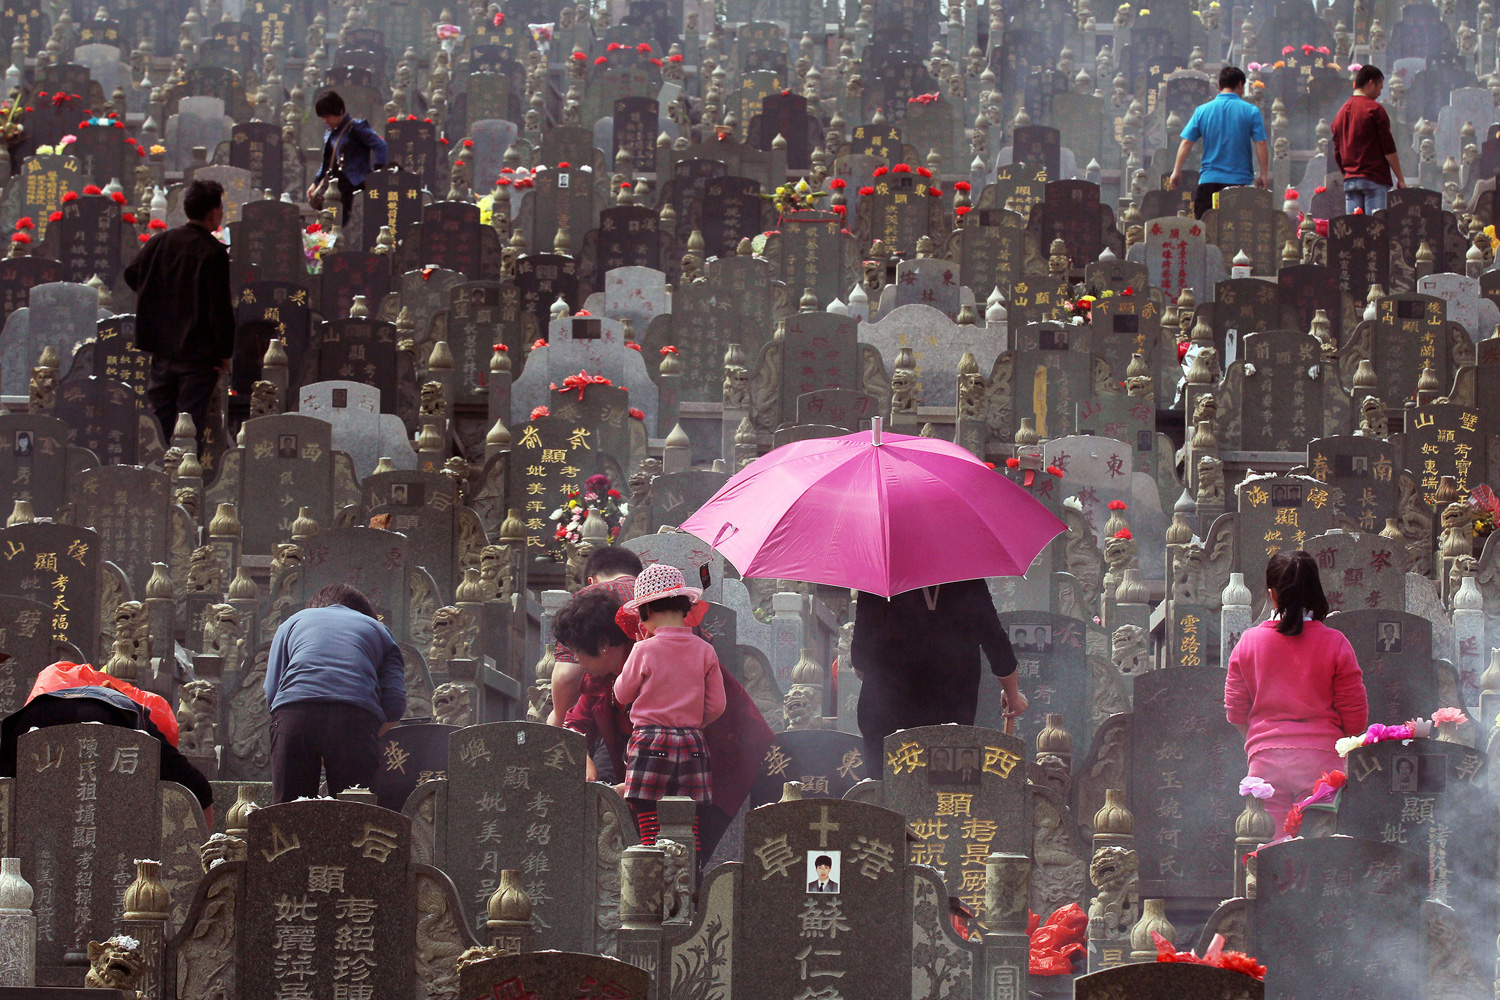 April 3, 2012. People visit the tombs of their loved ones in a cemetery in Jinjiang, China, during the Qingming Festival, or Tomb-Sweeping Day.